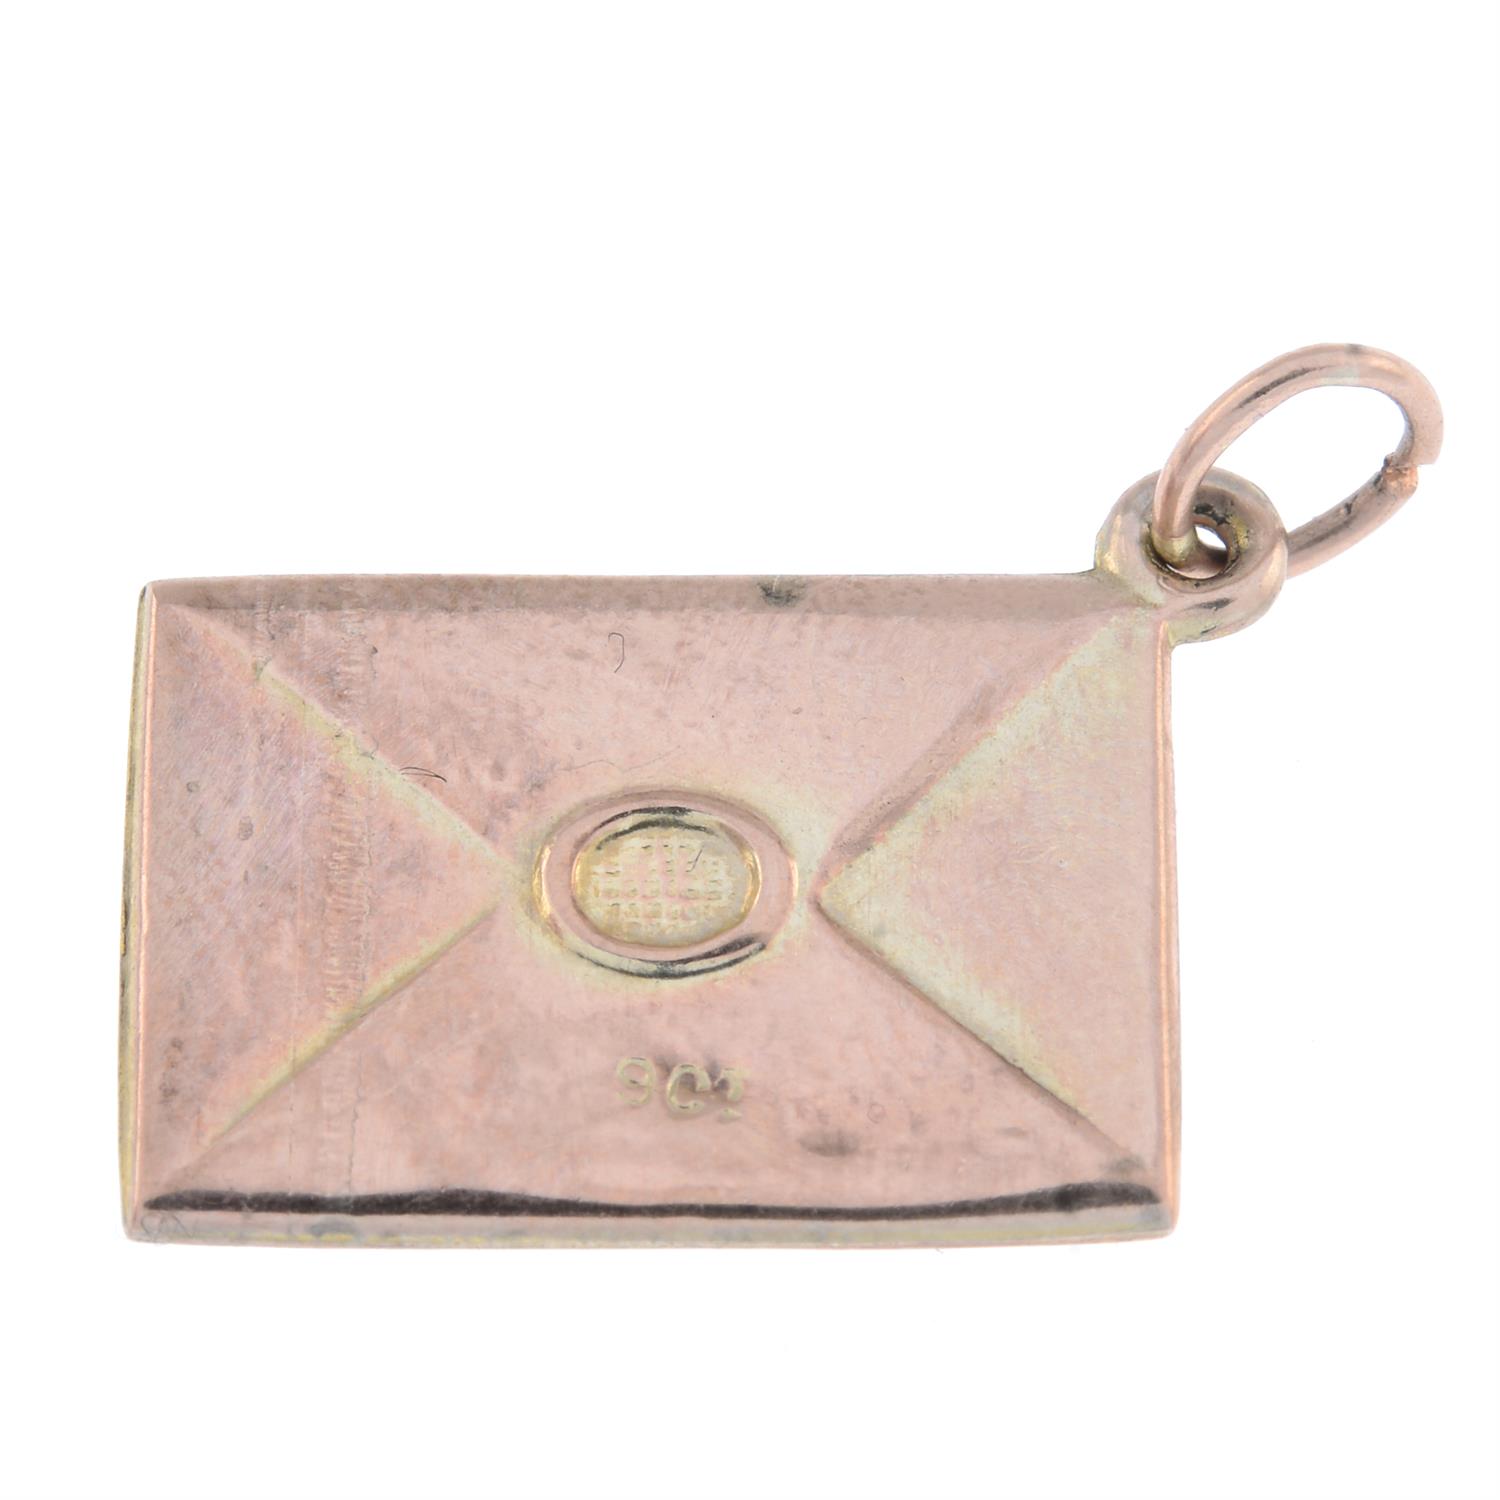 Mid 20th gold 'good luck' envelope charm - Image 2 of 2